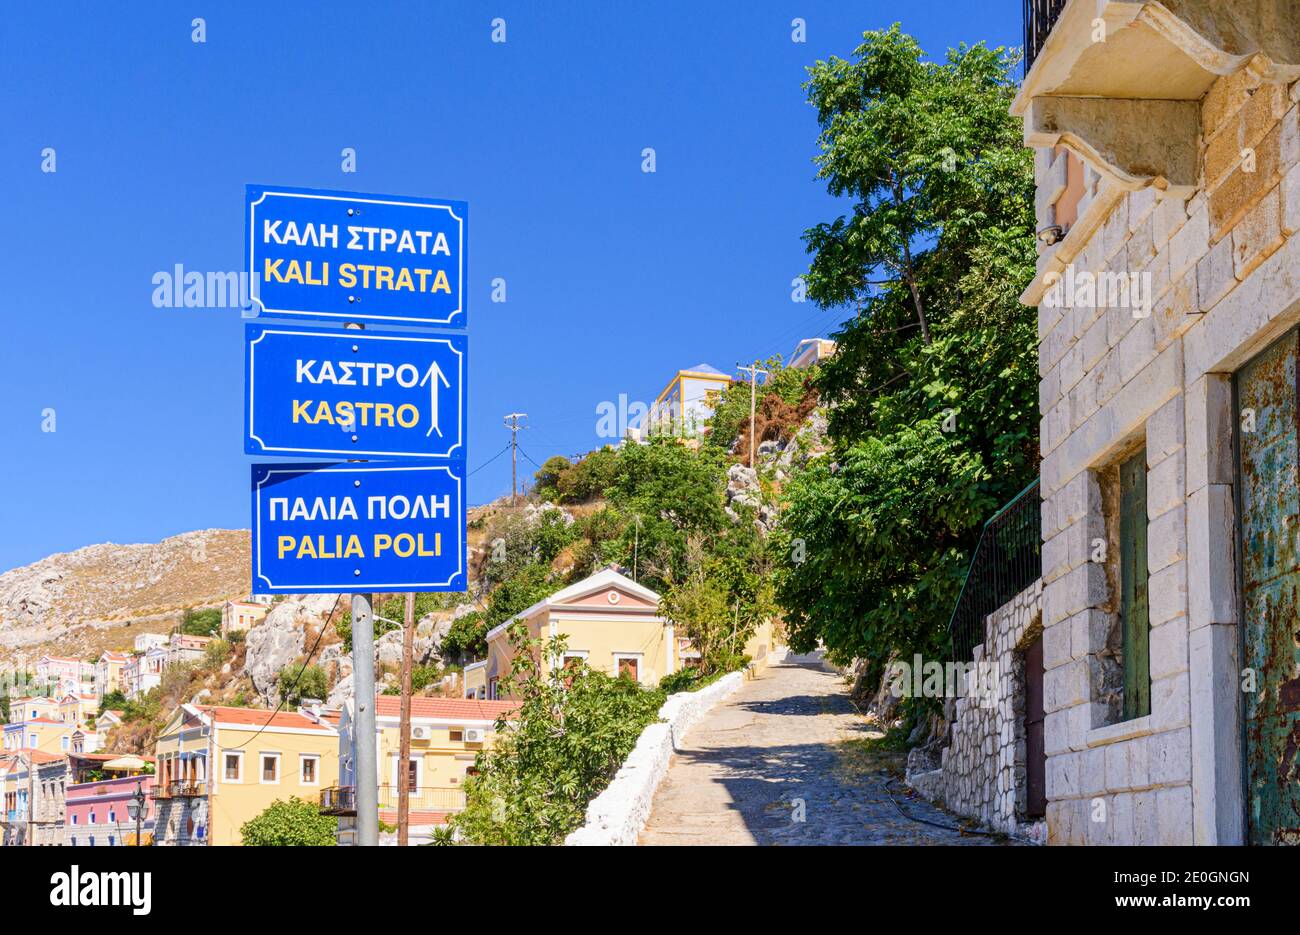 The approach to the Tembelosala, or Lazy Steps that lead to the main Kali Strata in Gialos, Symi, Dodecanese, Greece Stock Photo